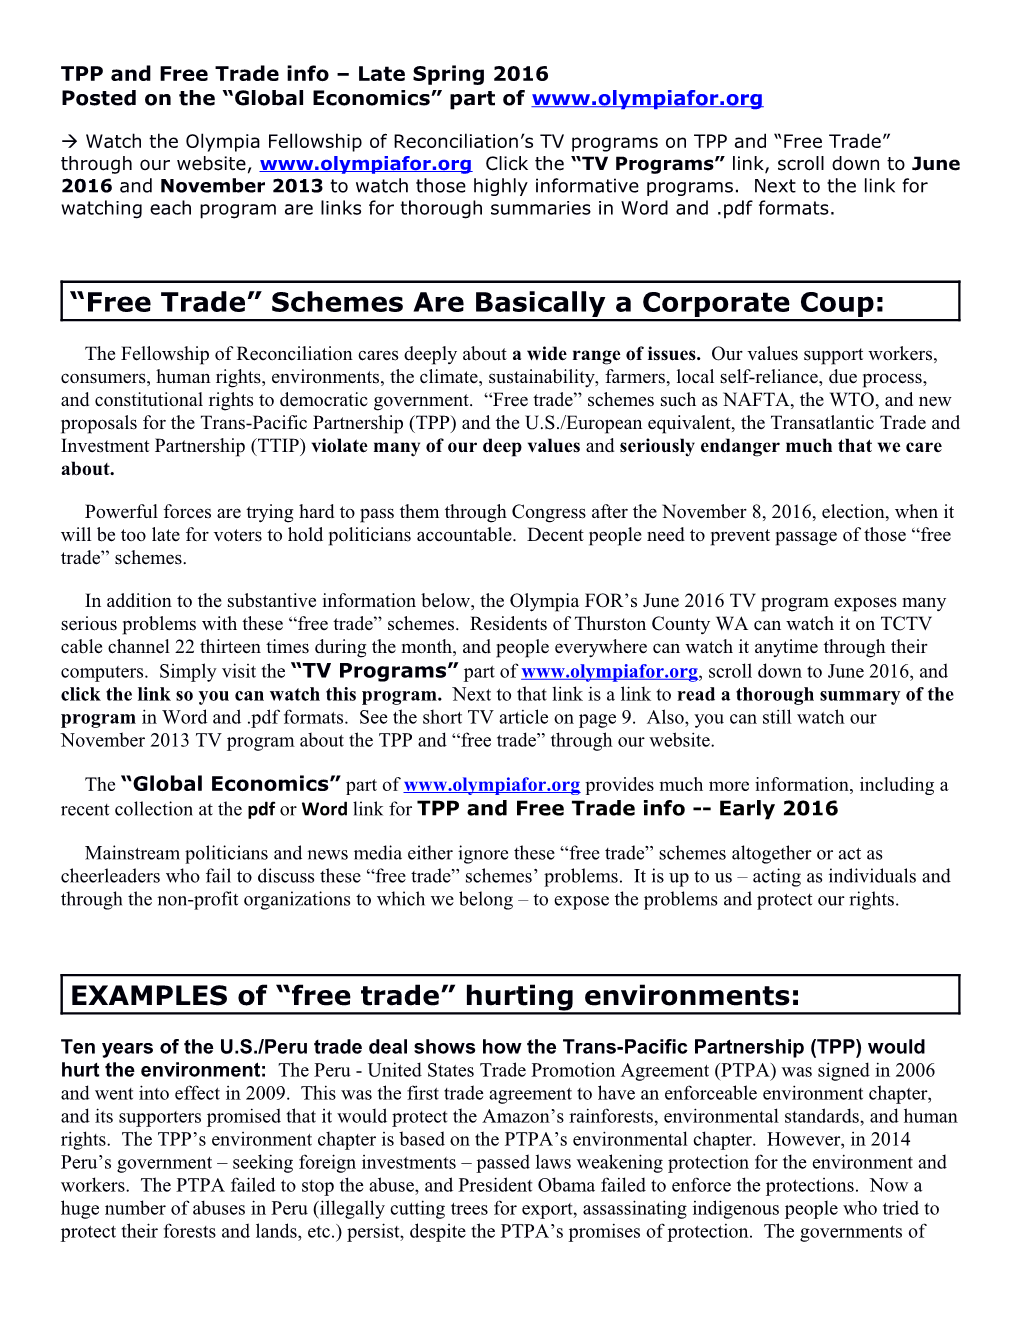 TPP and Free Trade Info Late Spring 2016